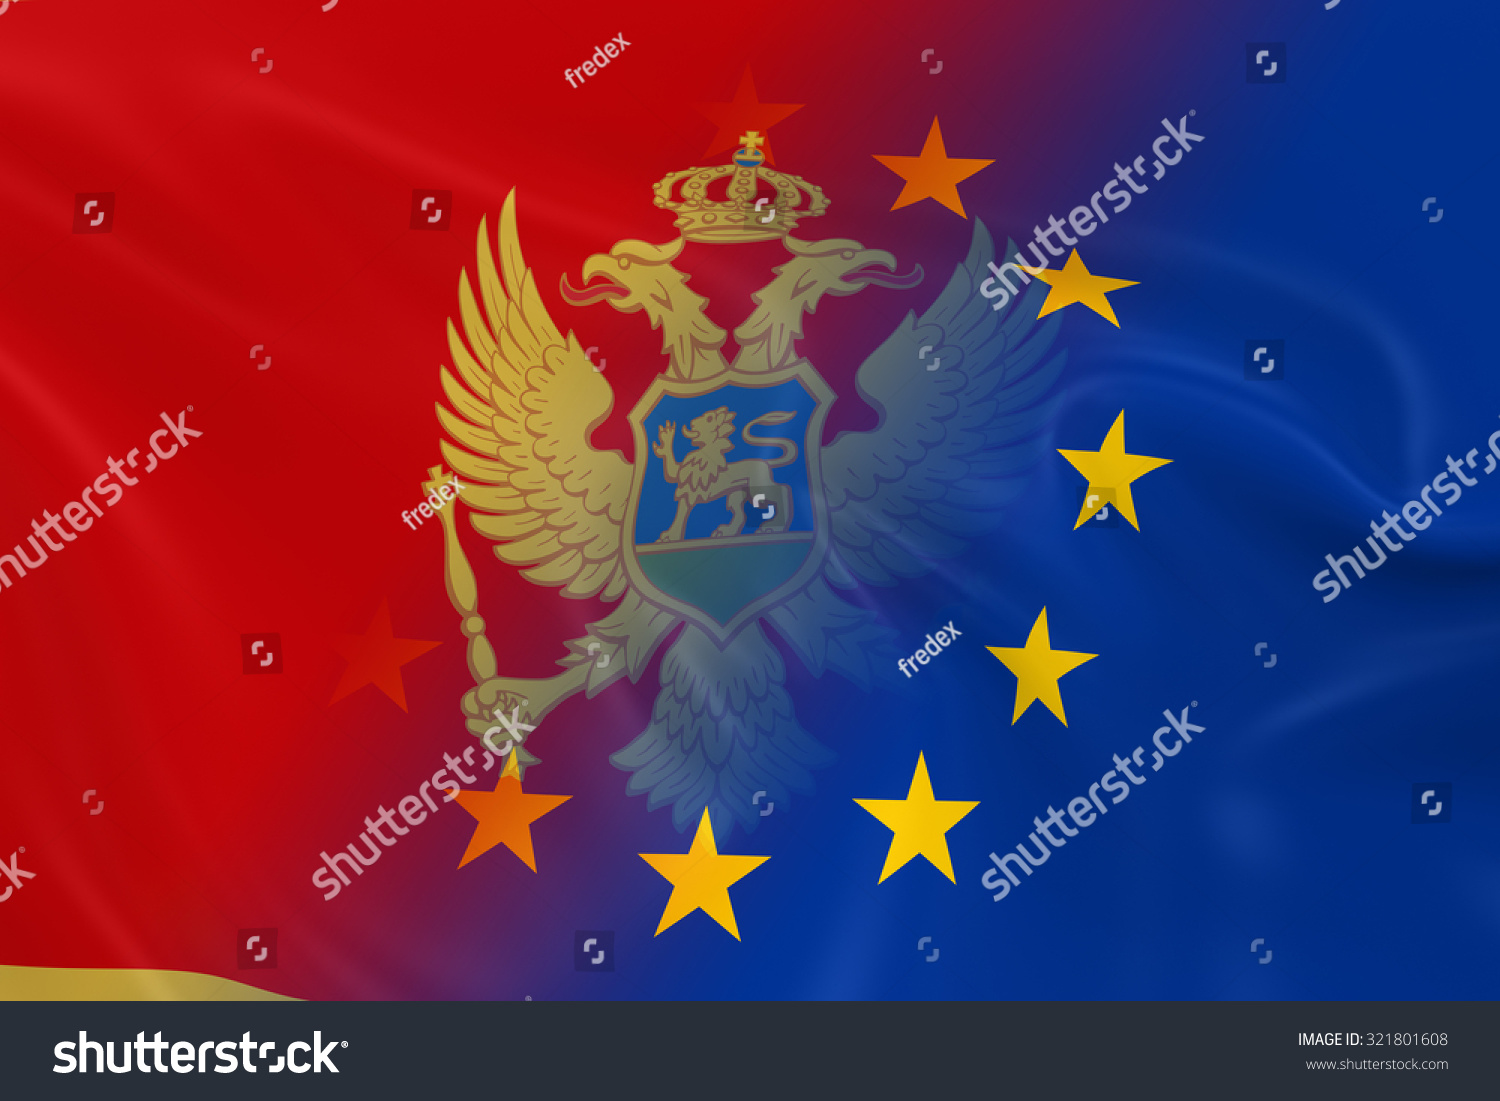 montenegrin-and-european-relations-concept-image-flags-of-montenegro